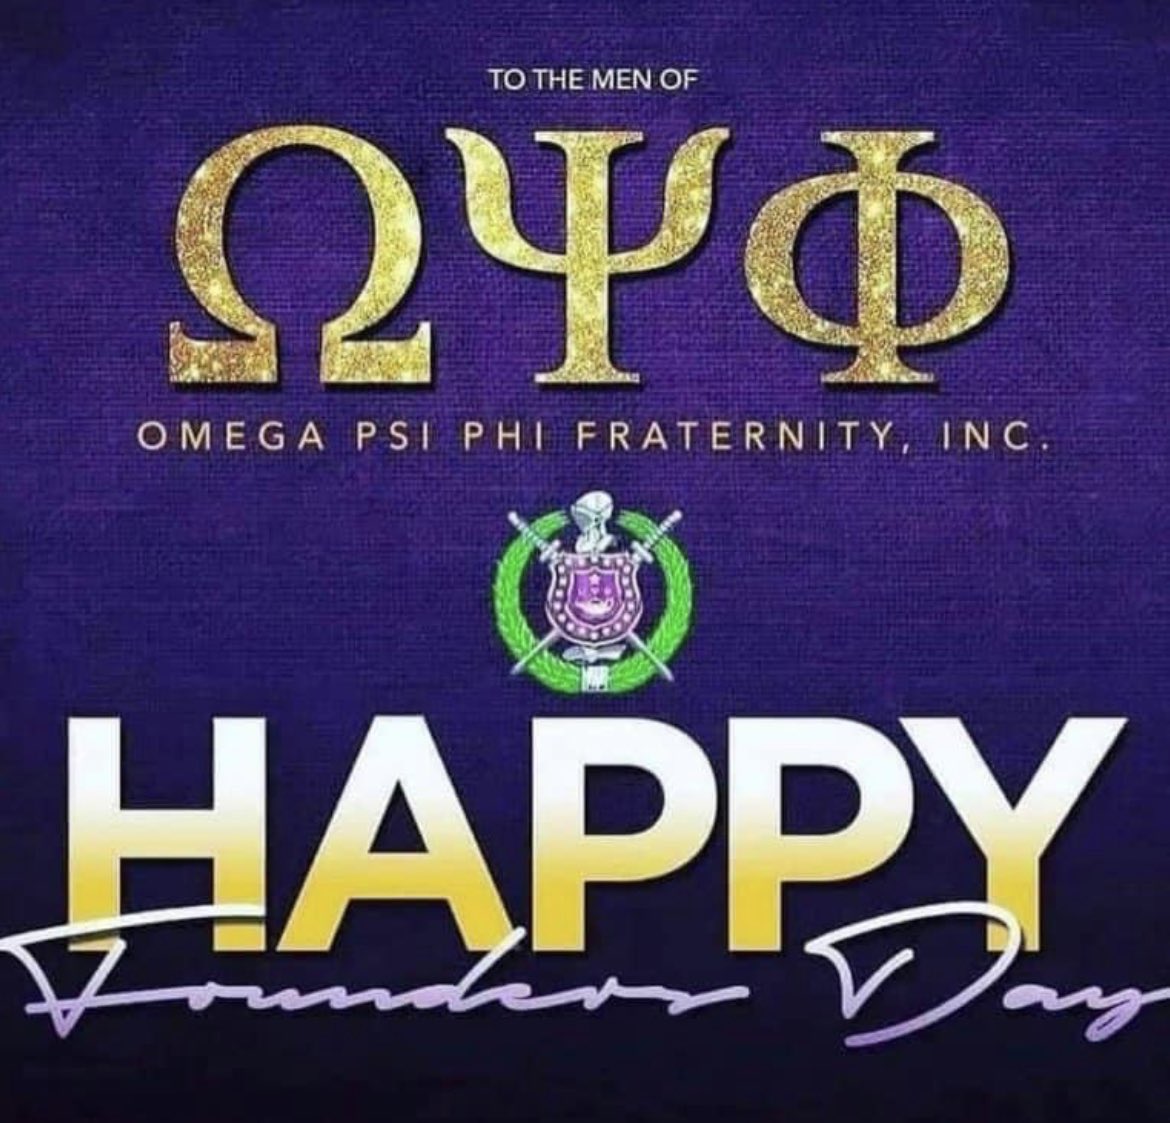 Happy Founders Day! #thebruhs #colemanlove